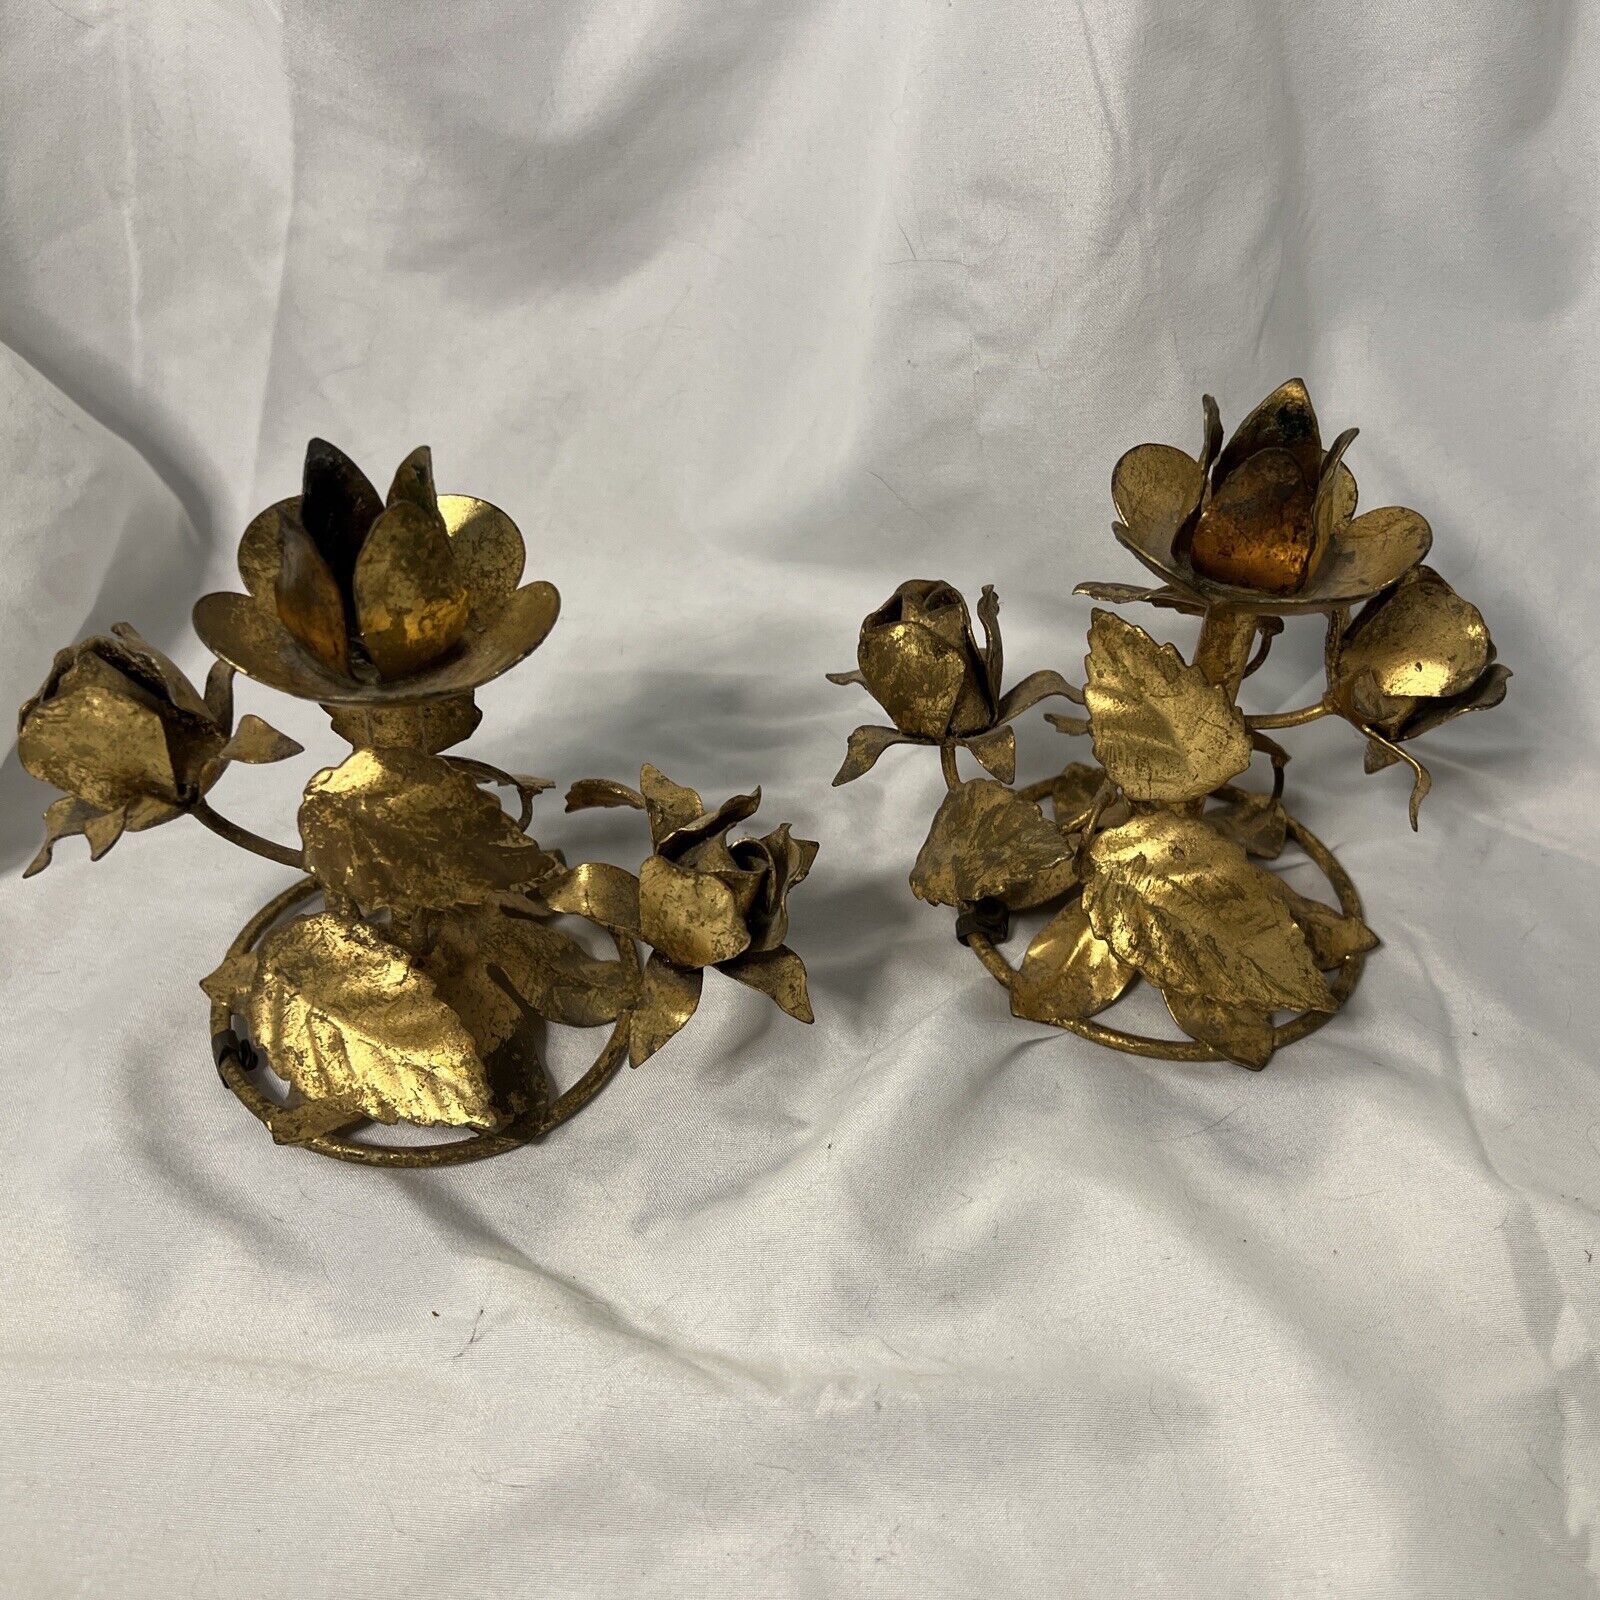 SALE Pair Vintage Italian Tole Gold Gilded Candle Holder Hollywood Regency Roses